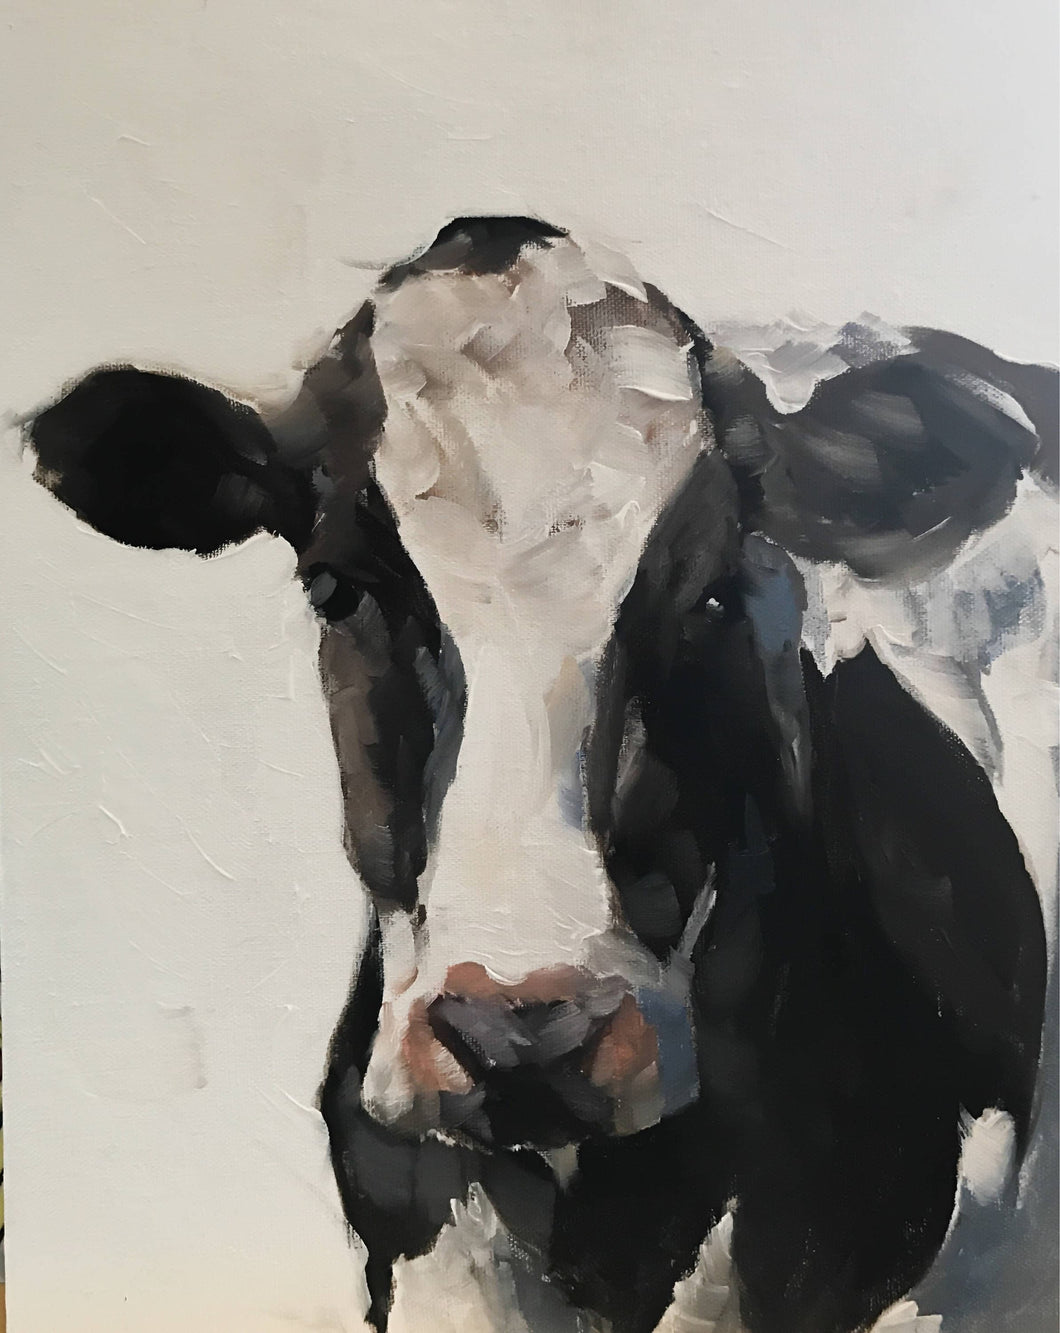 Cow Painting -Cow art - Cow Print - Fine Art - from original oil painting by James Coates